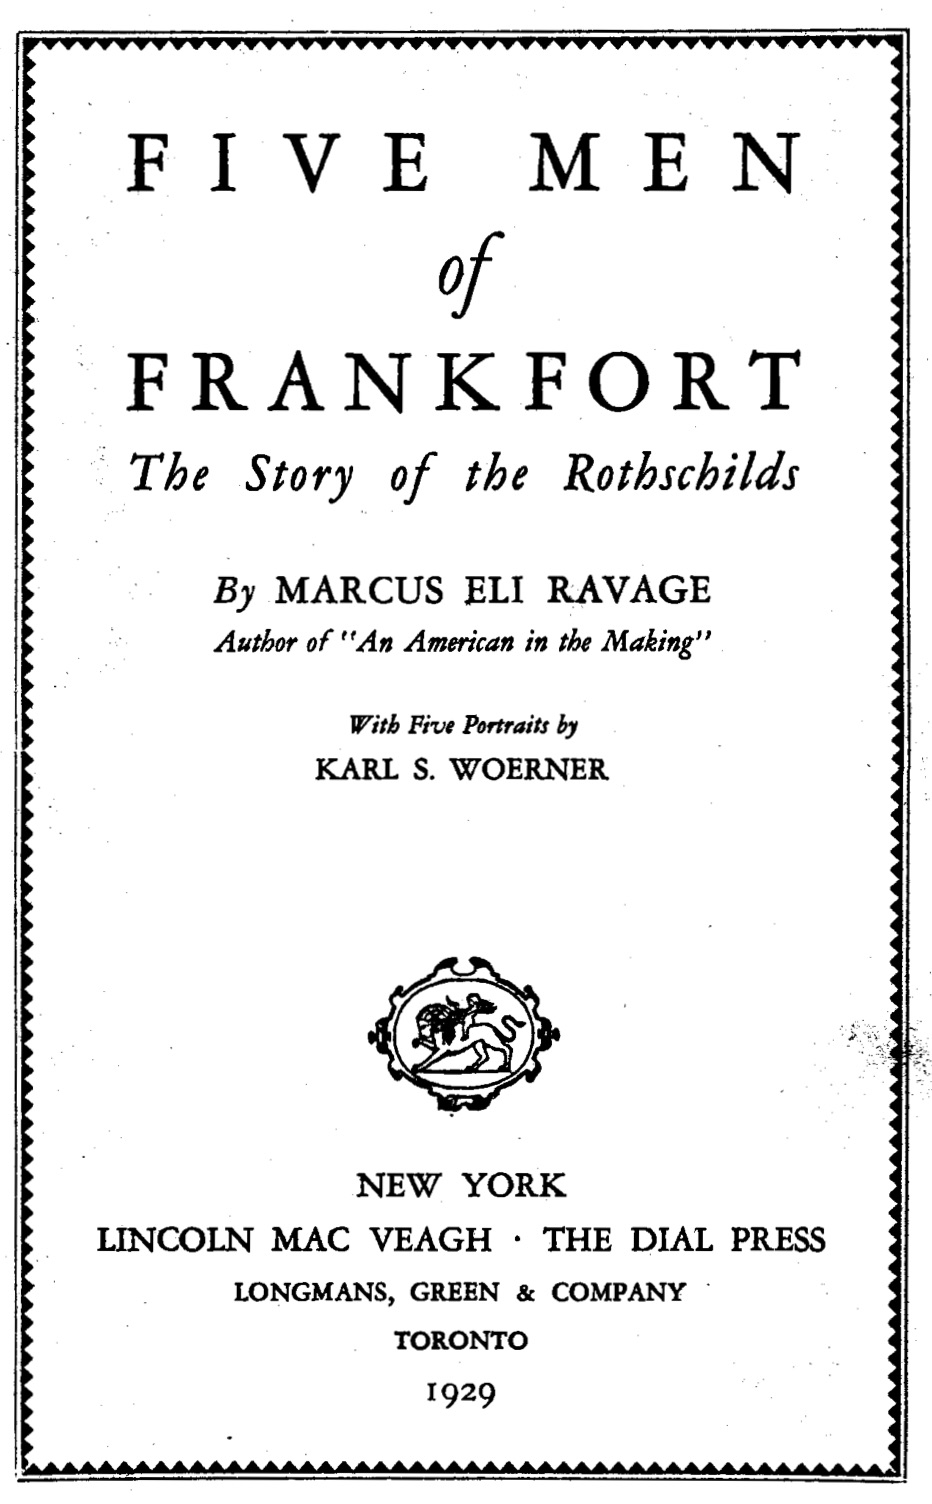 Five Men of Frankfort: The Story of the Rothschilds (1929) by Marcus Eli Ravage